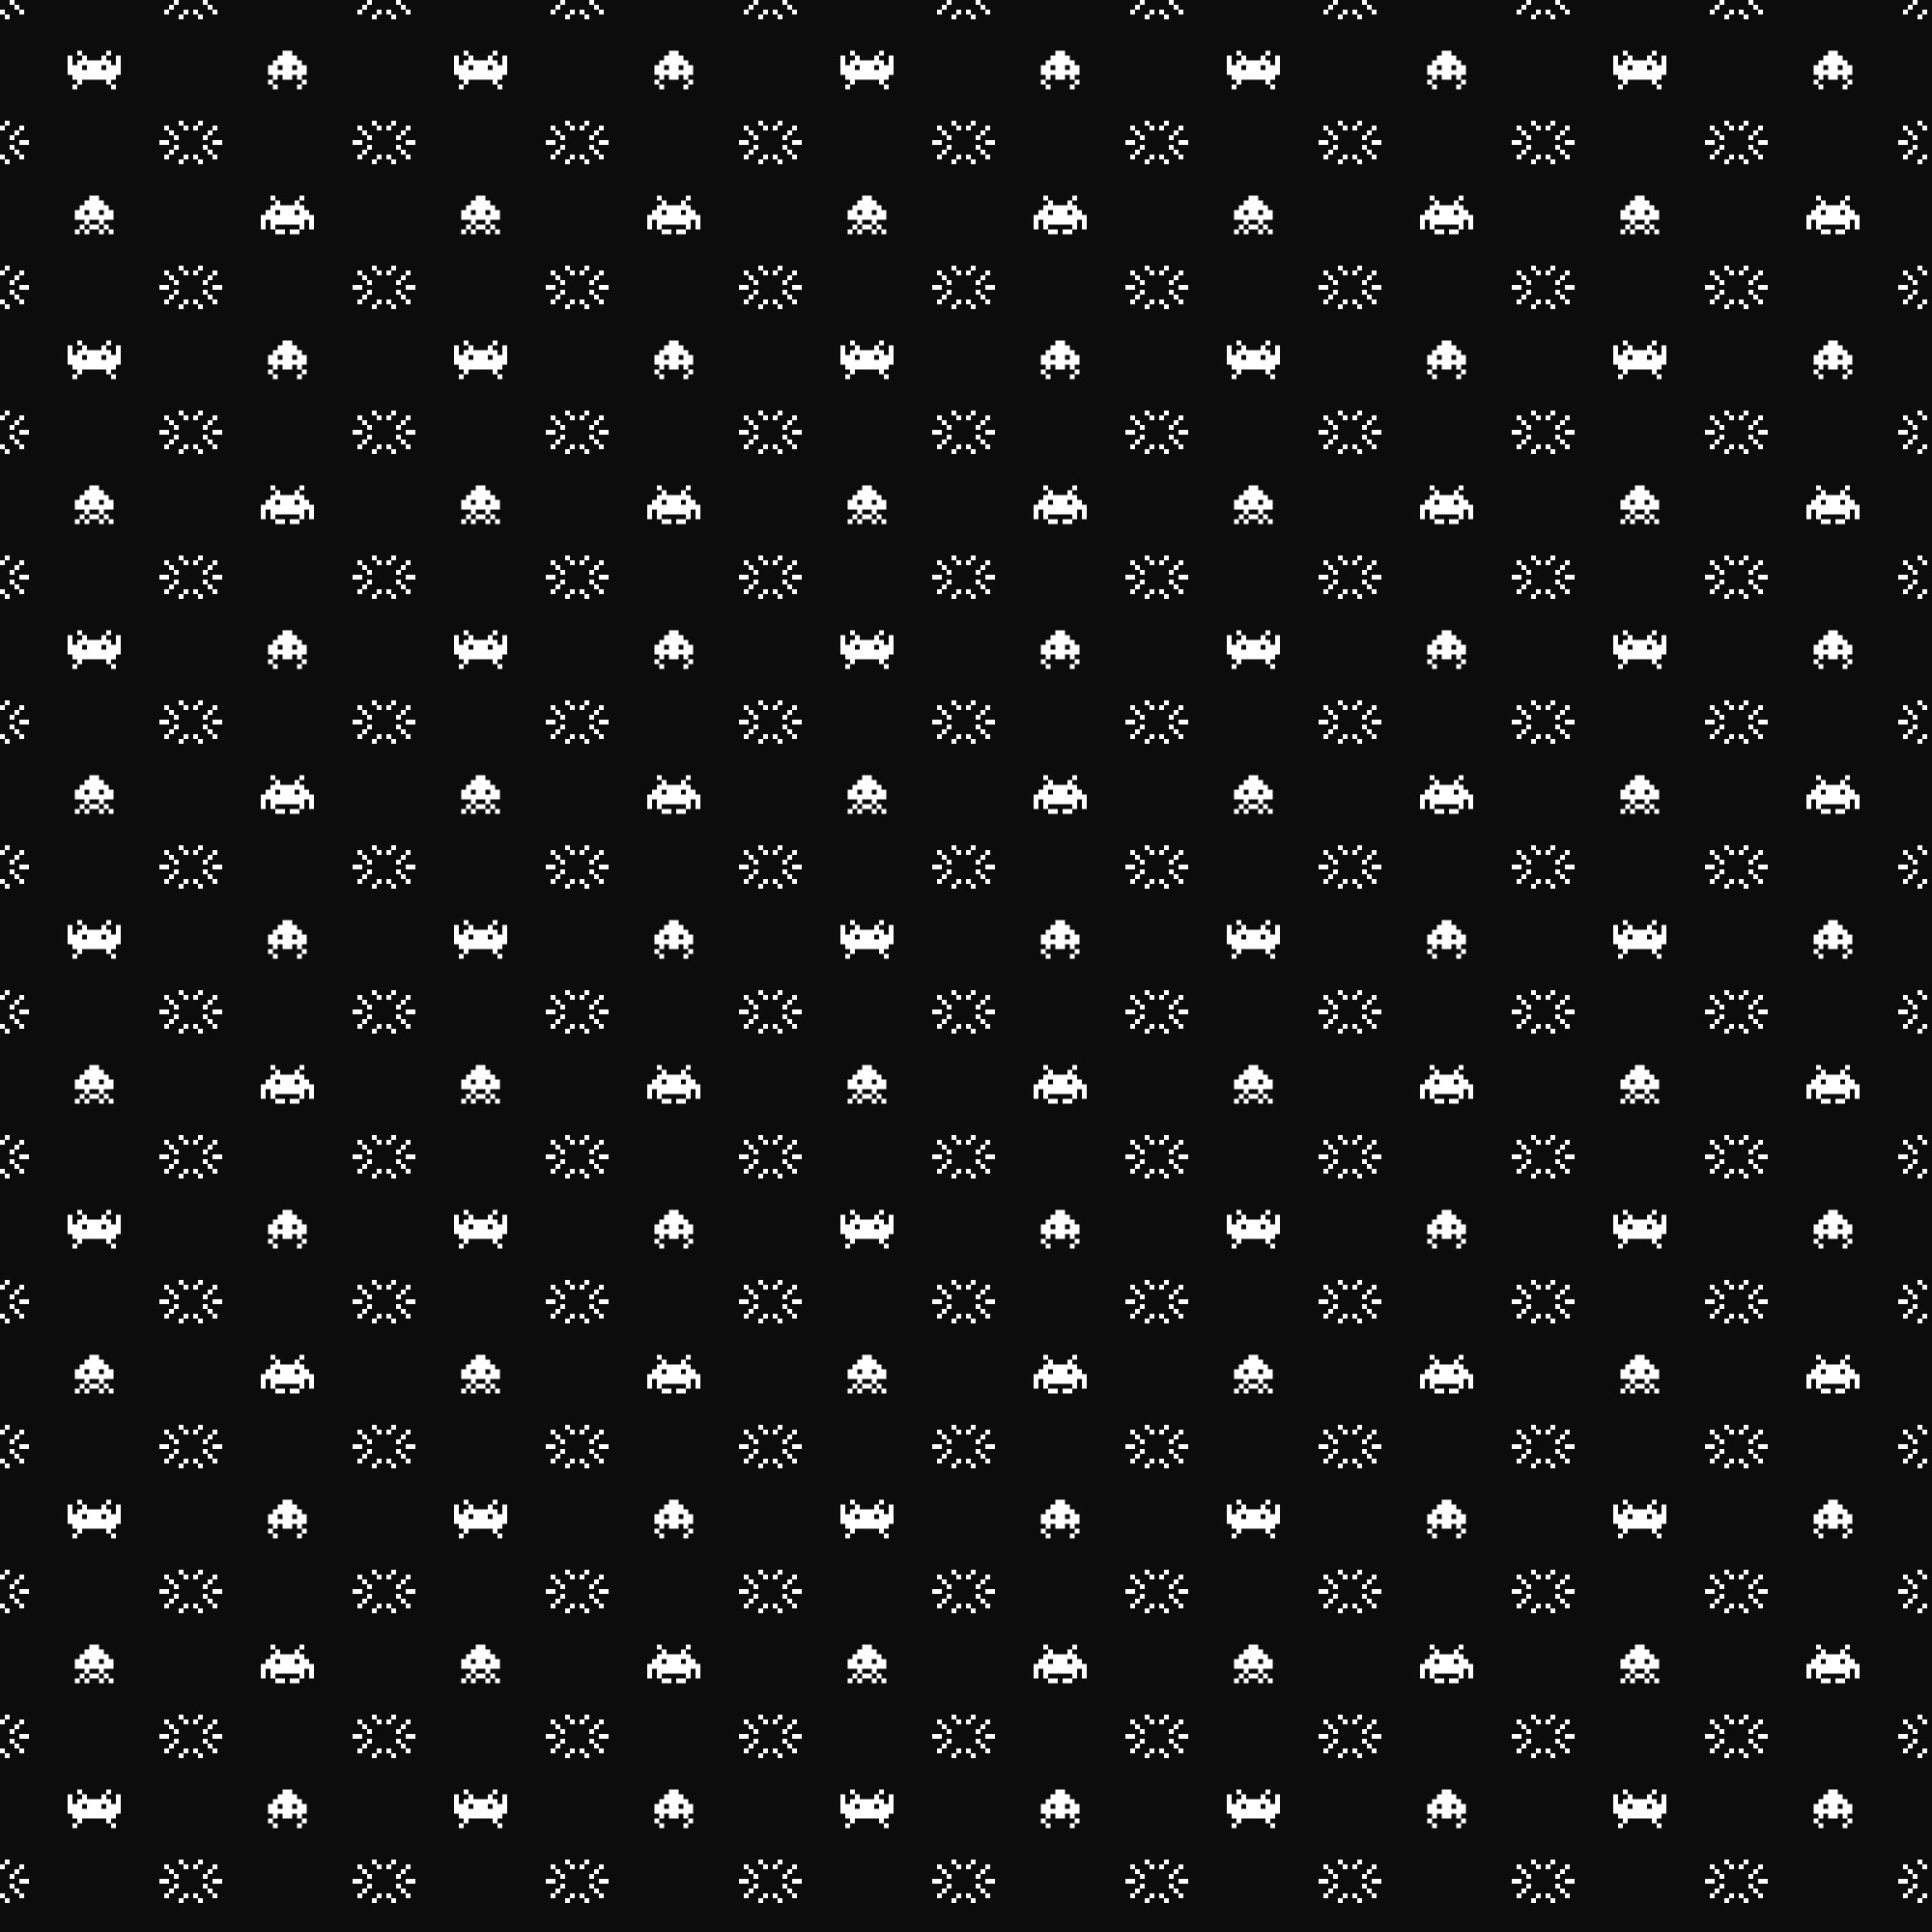 2000x2000 Space Invaders Background by DisasterLab Space Invaders Background by  DisasterLab